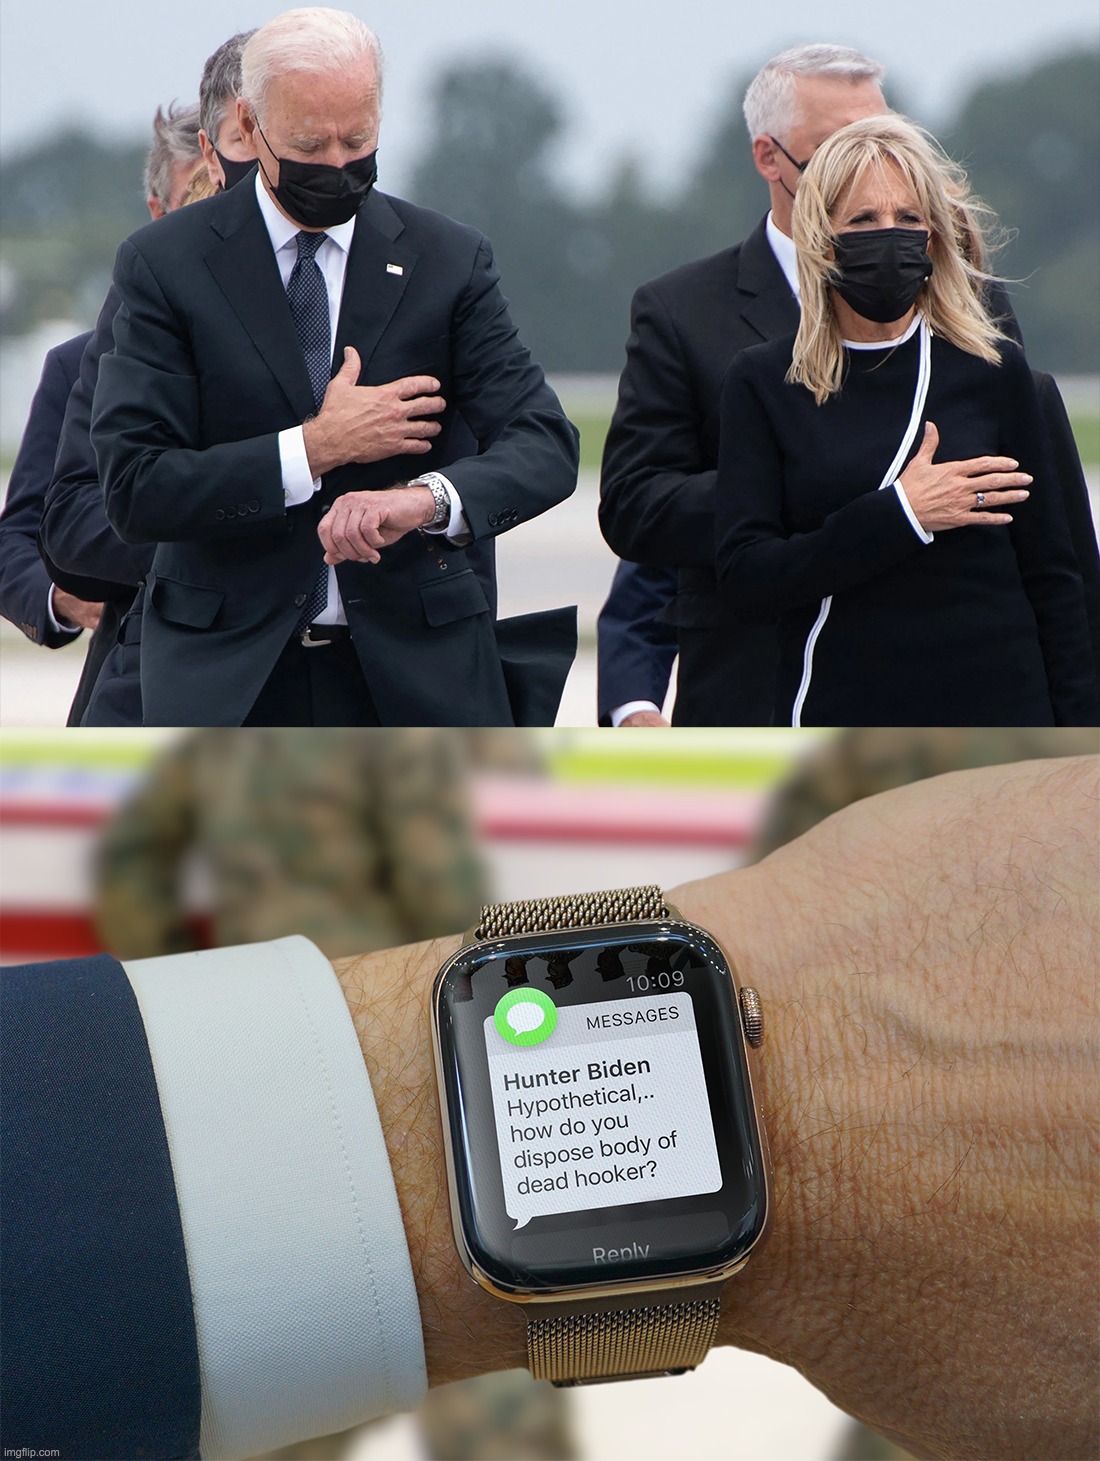 When you receive a message from the smartest guy you know. | image tagged in joe biden,afghanistan,disgrace,hunter biden | made w/ Imgflip meme maker